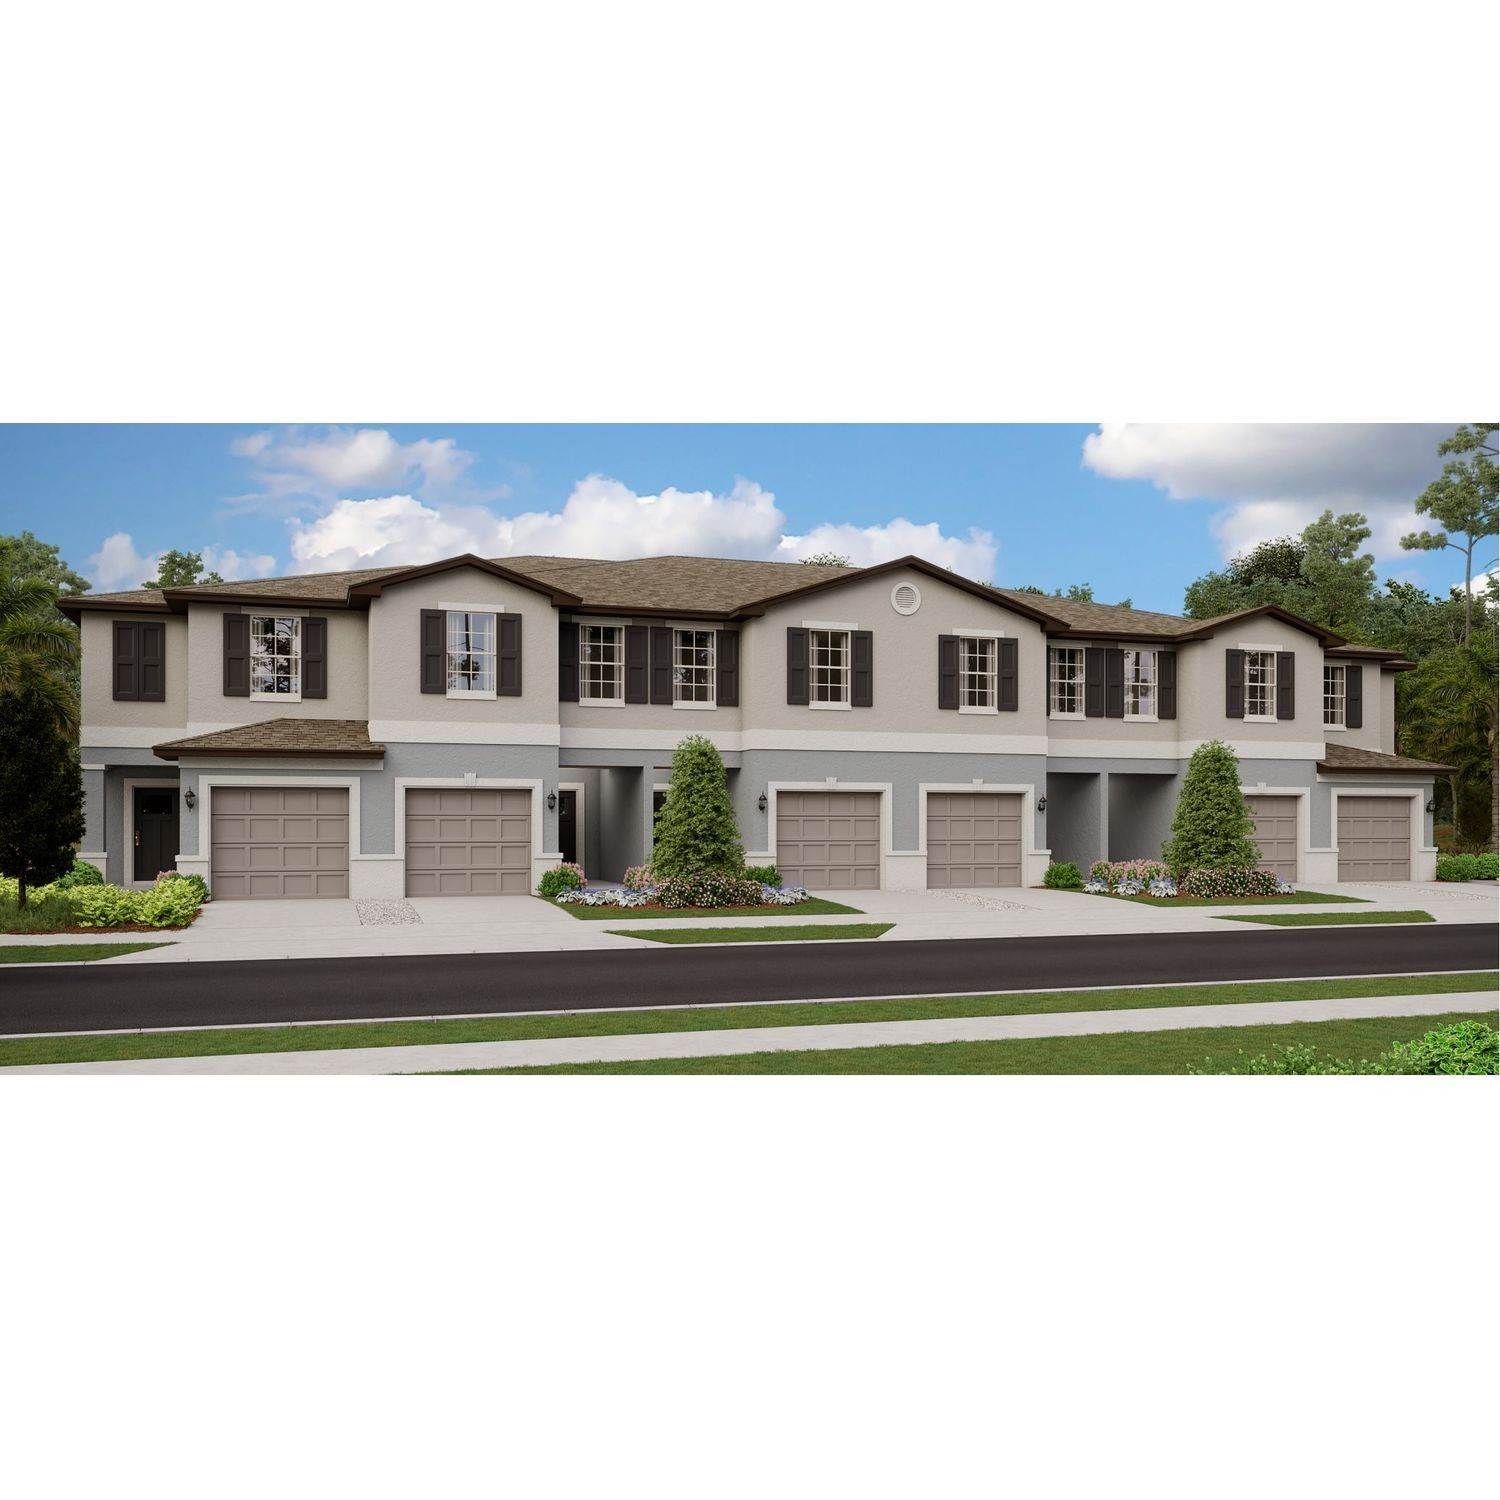 3. Townes at Lake Thomas - The Townhomes bâtiment à 21415 Darter Road, Land O' Lakes, FL 34638